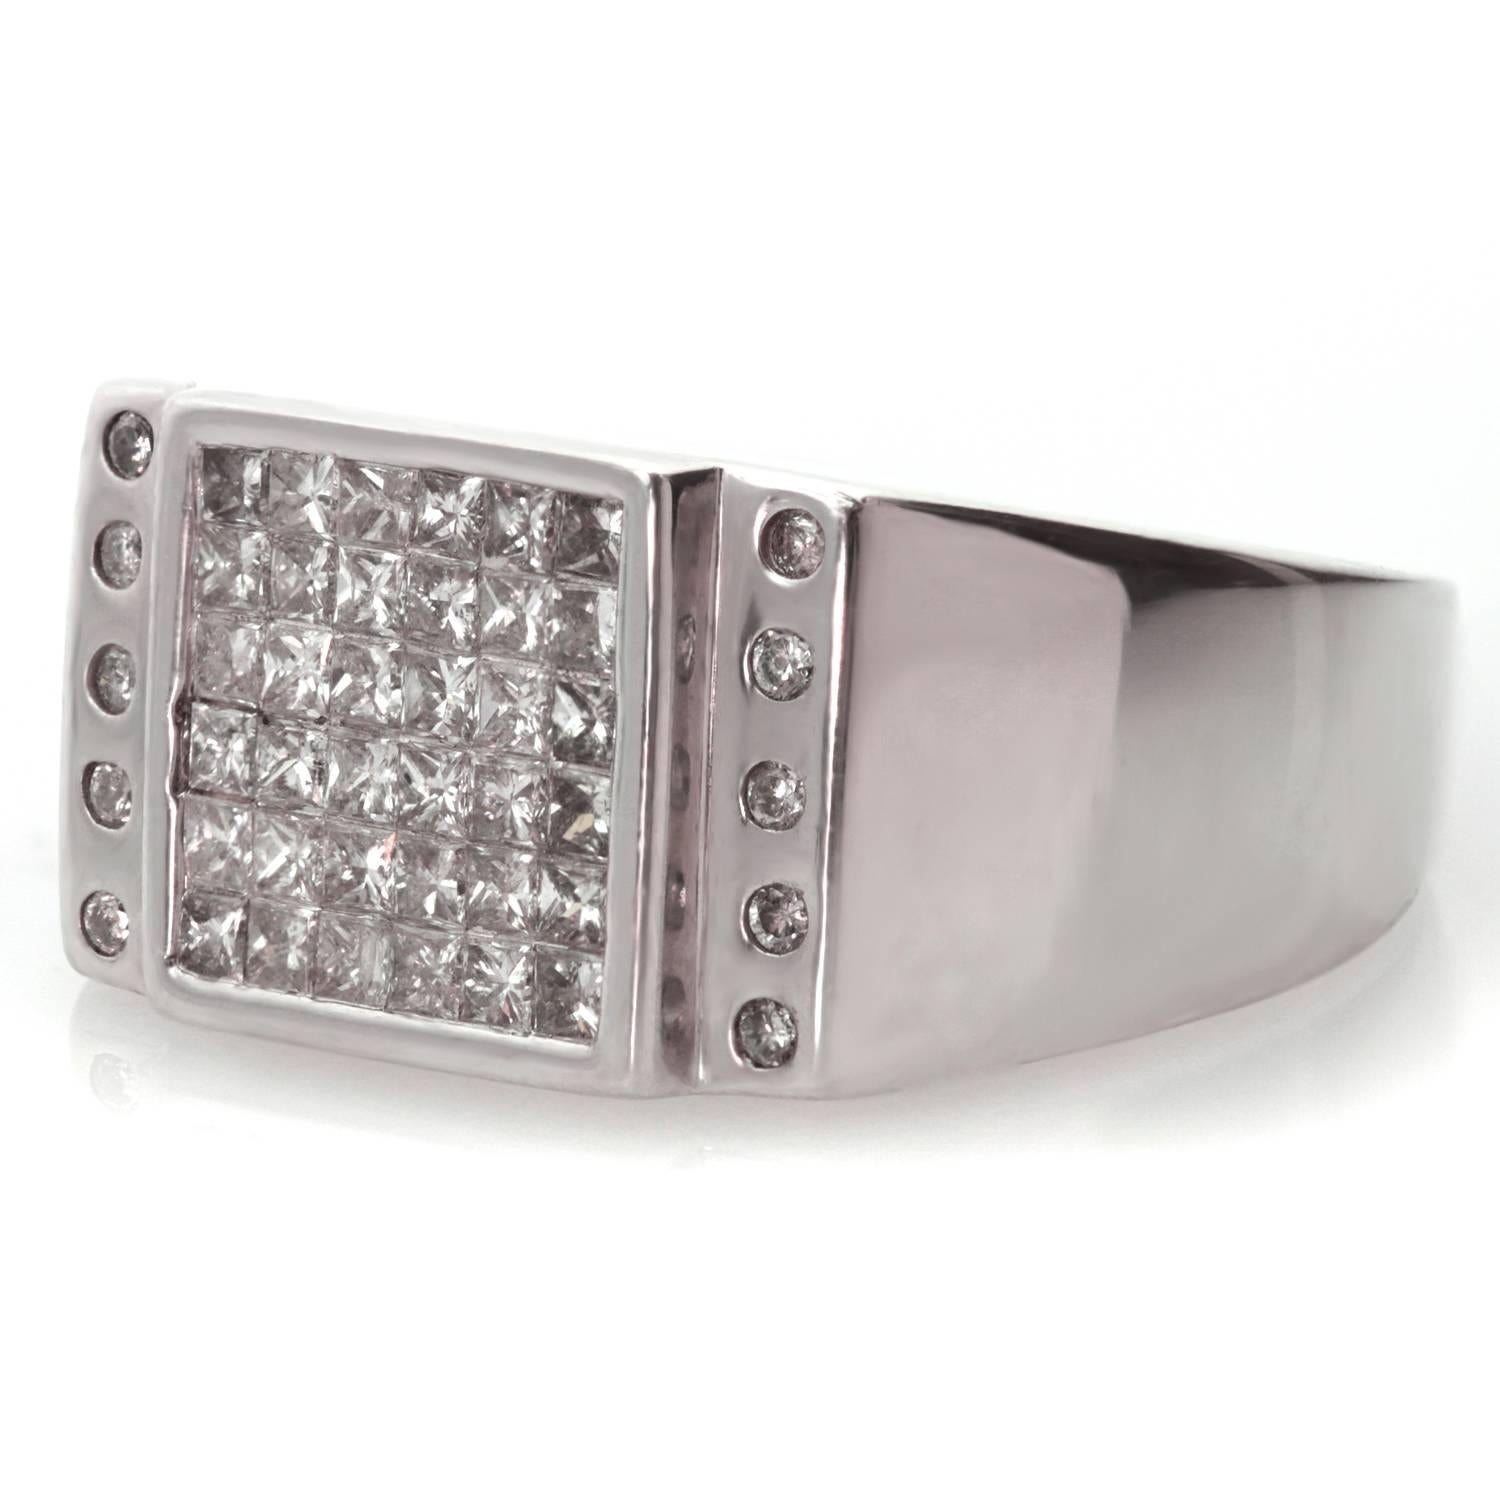 This modern men's ring is made in 14k white gold and features an estimated 1.20 carats of princess-cut round diamonds in an invisible setting. Measurements: 0.43